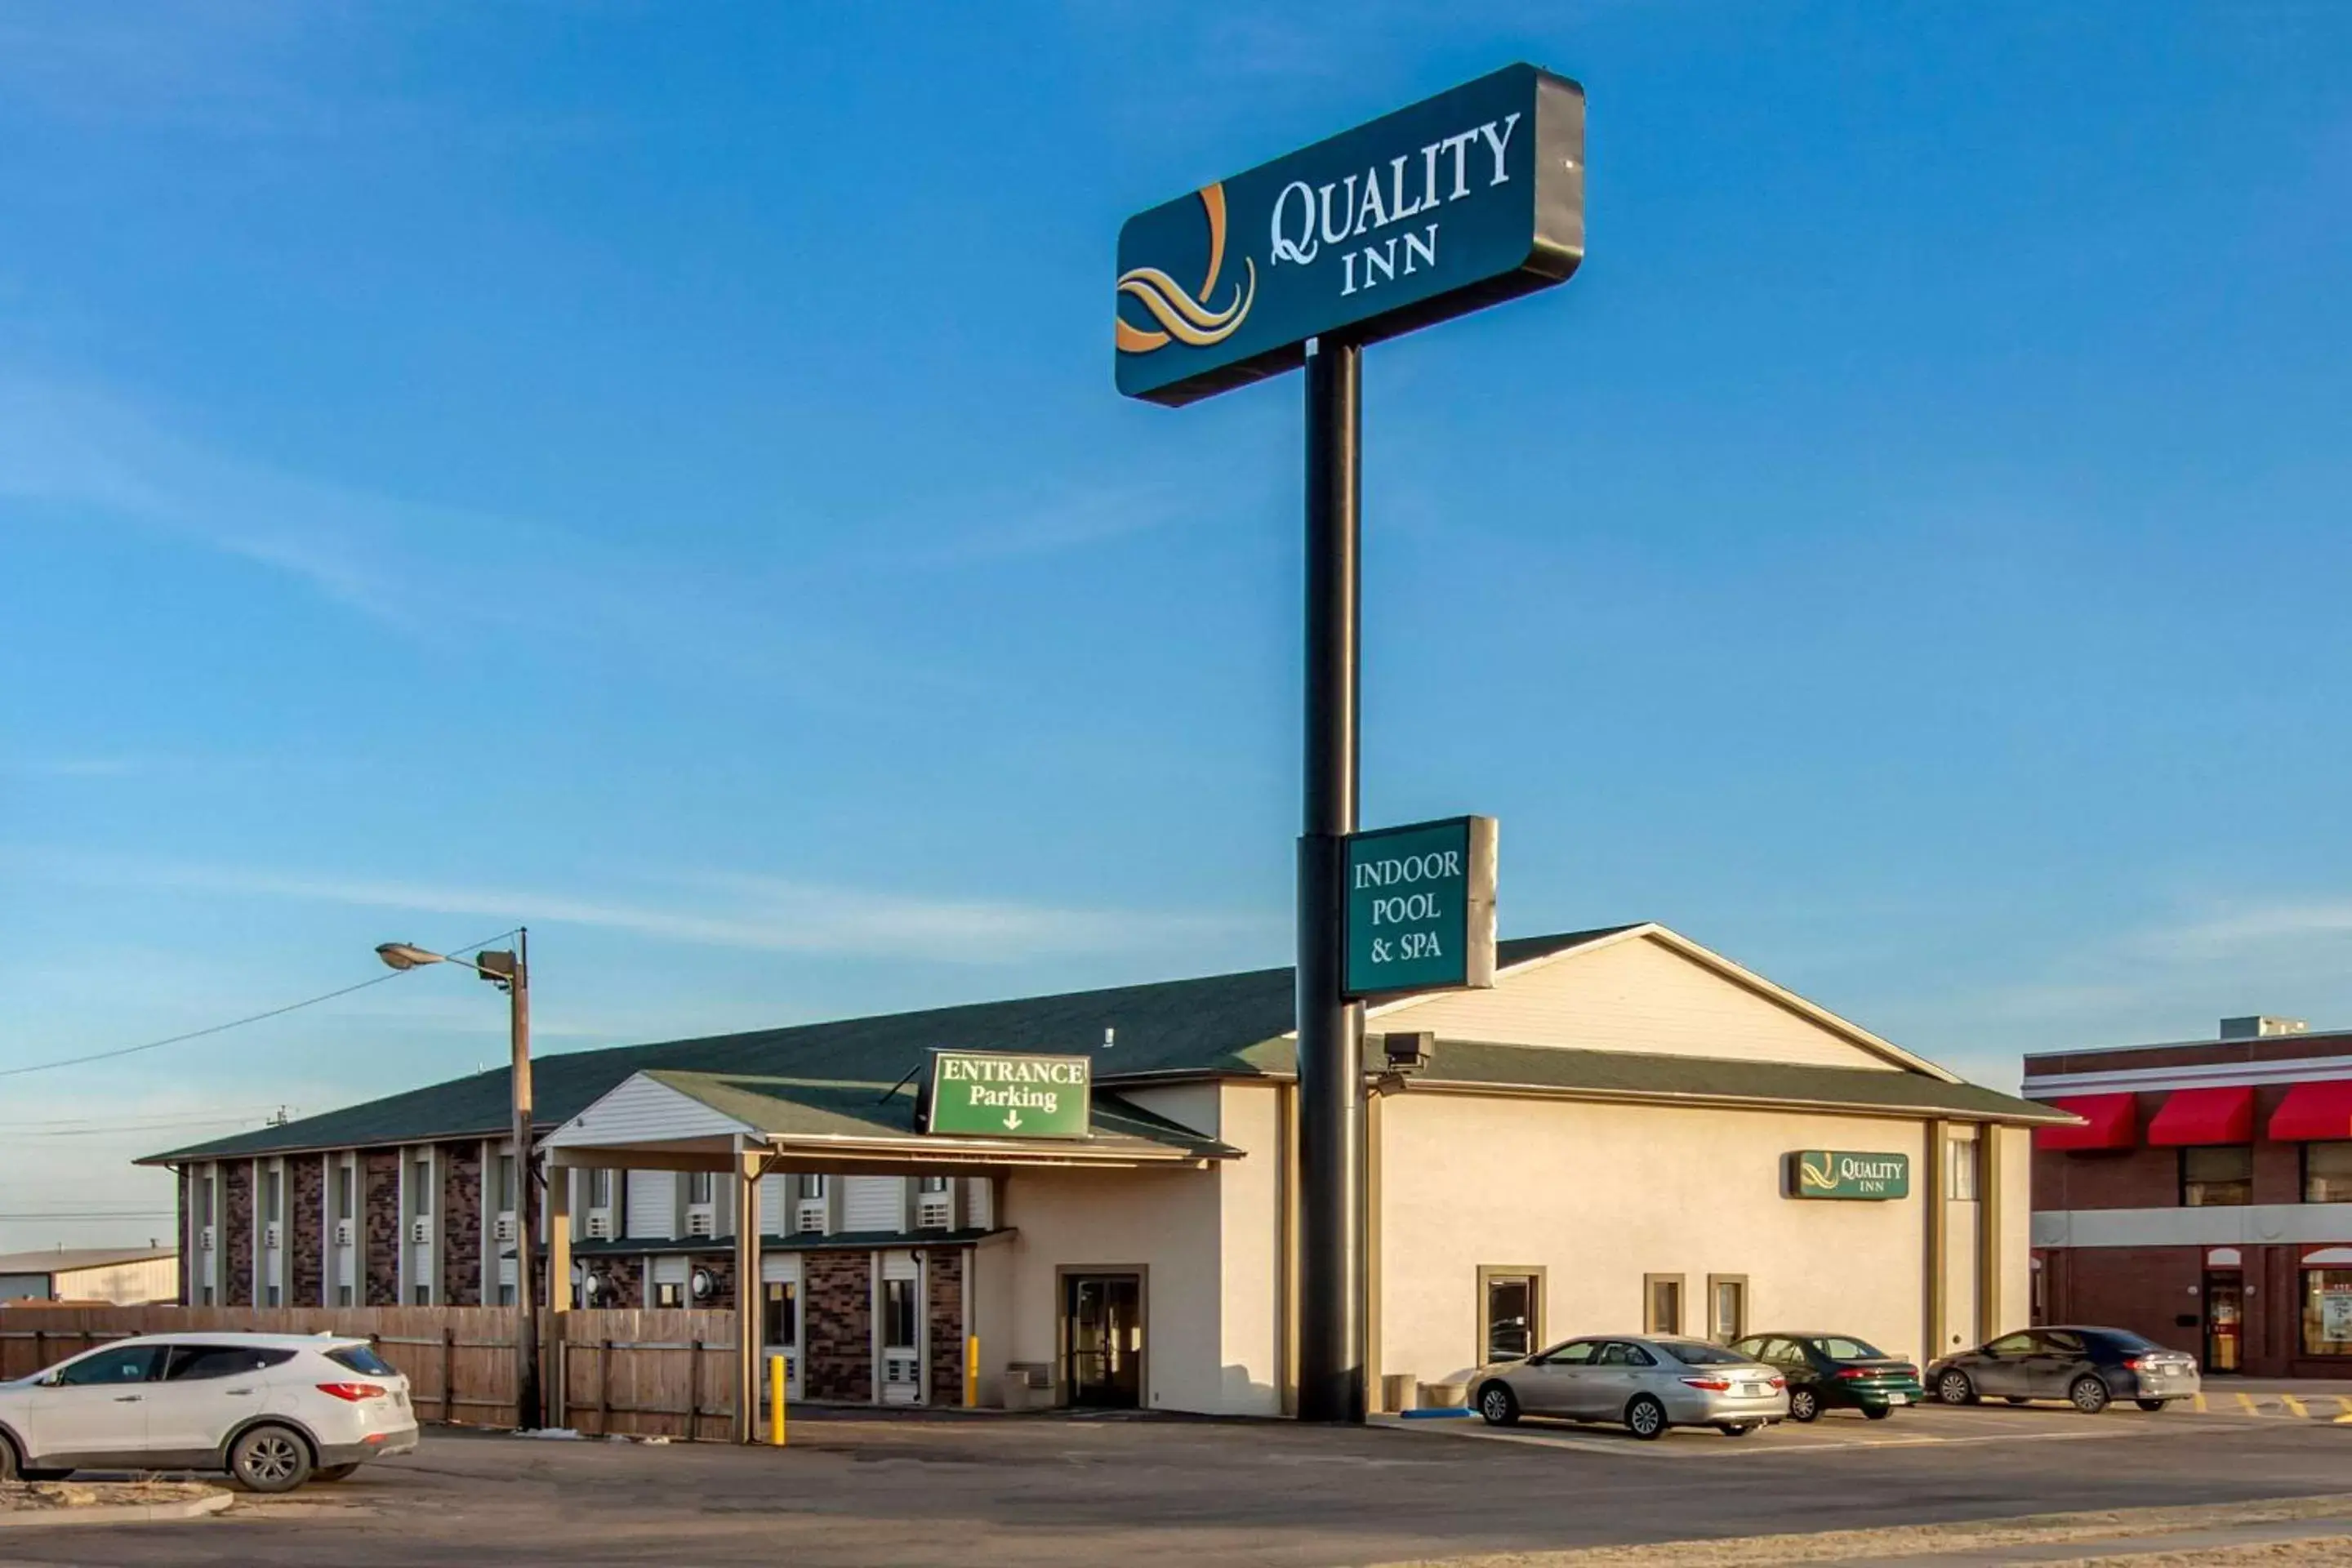 Property Building in Quality Inn Hays I-70